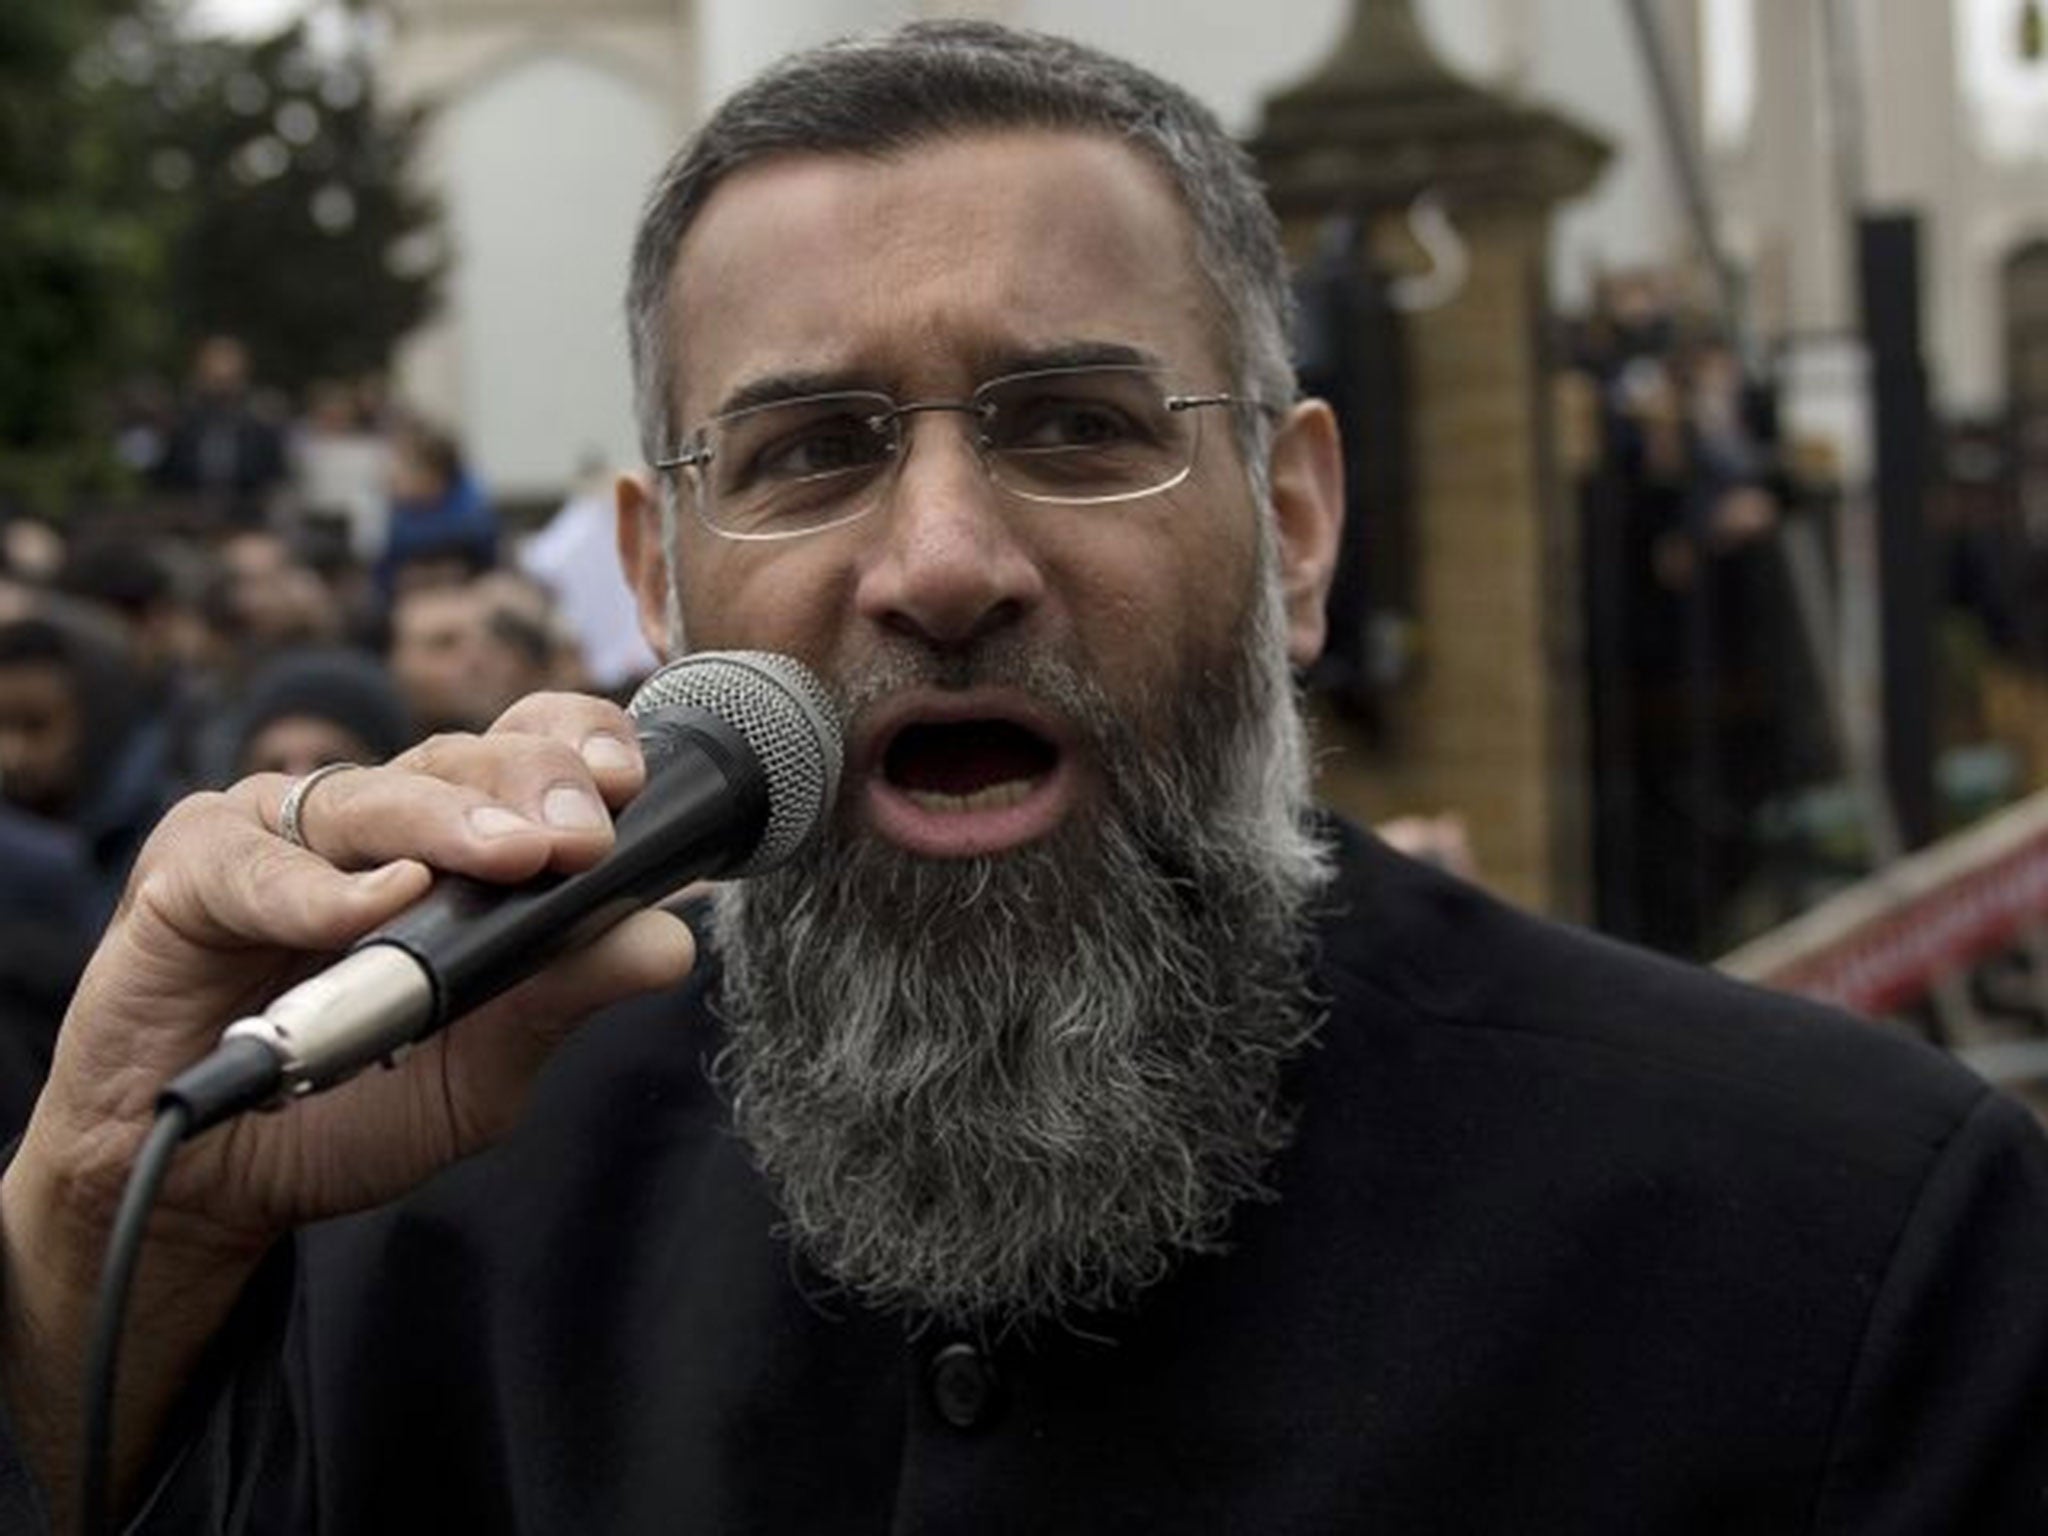 Radical cleric Anjem Choudary speaking outside London Central Mosque and Islamic Cultural Centre in London.